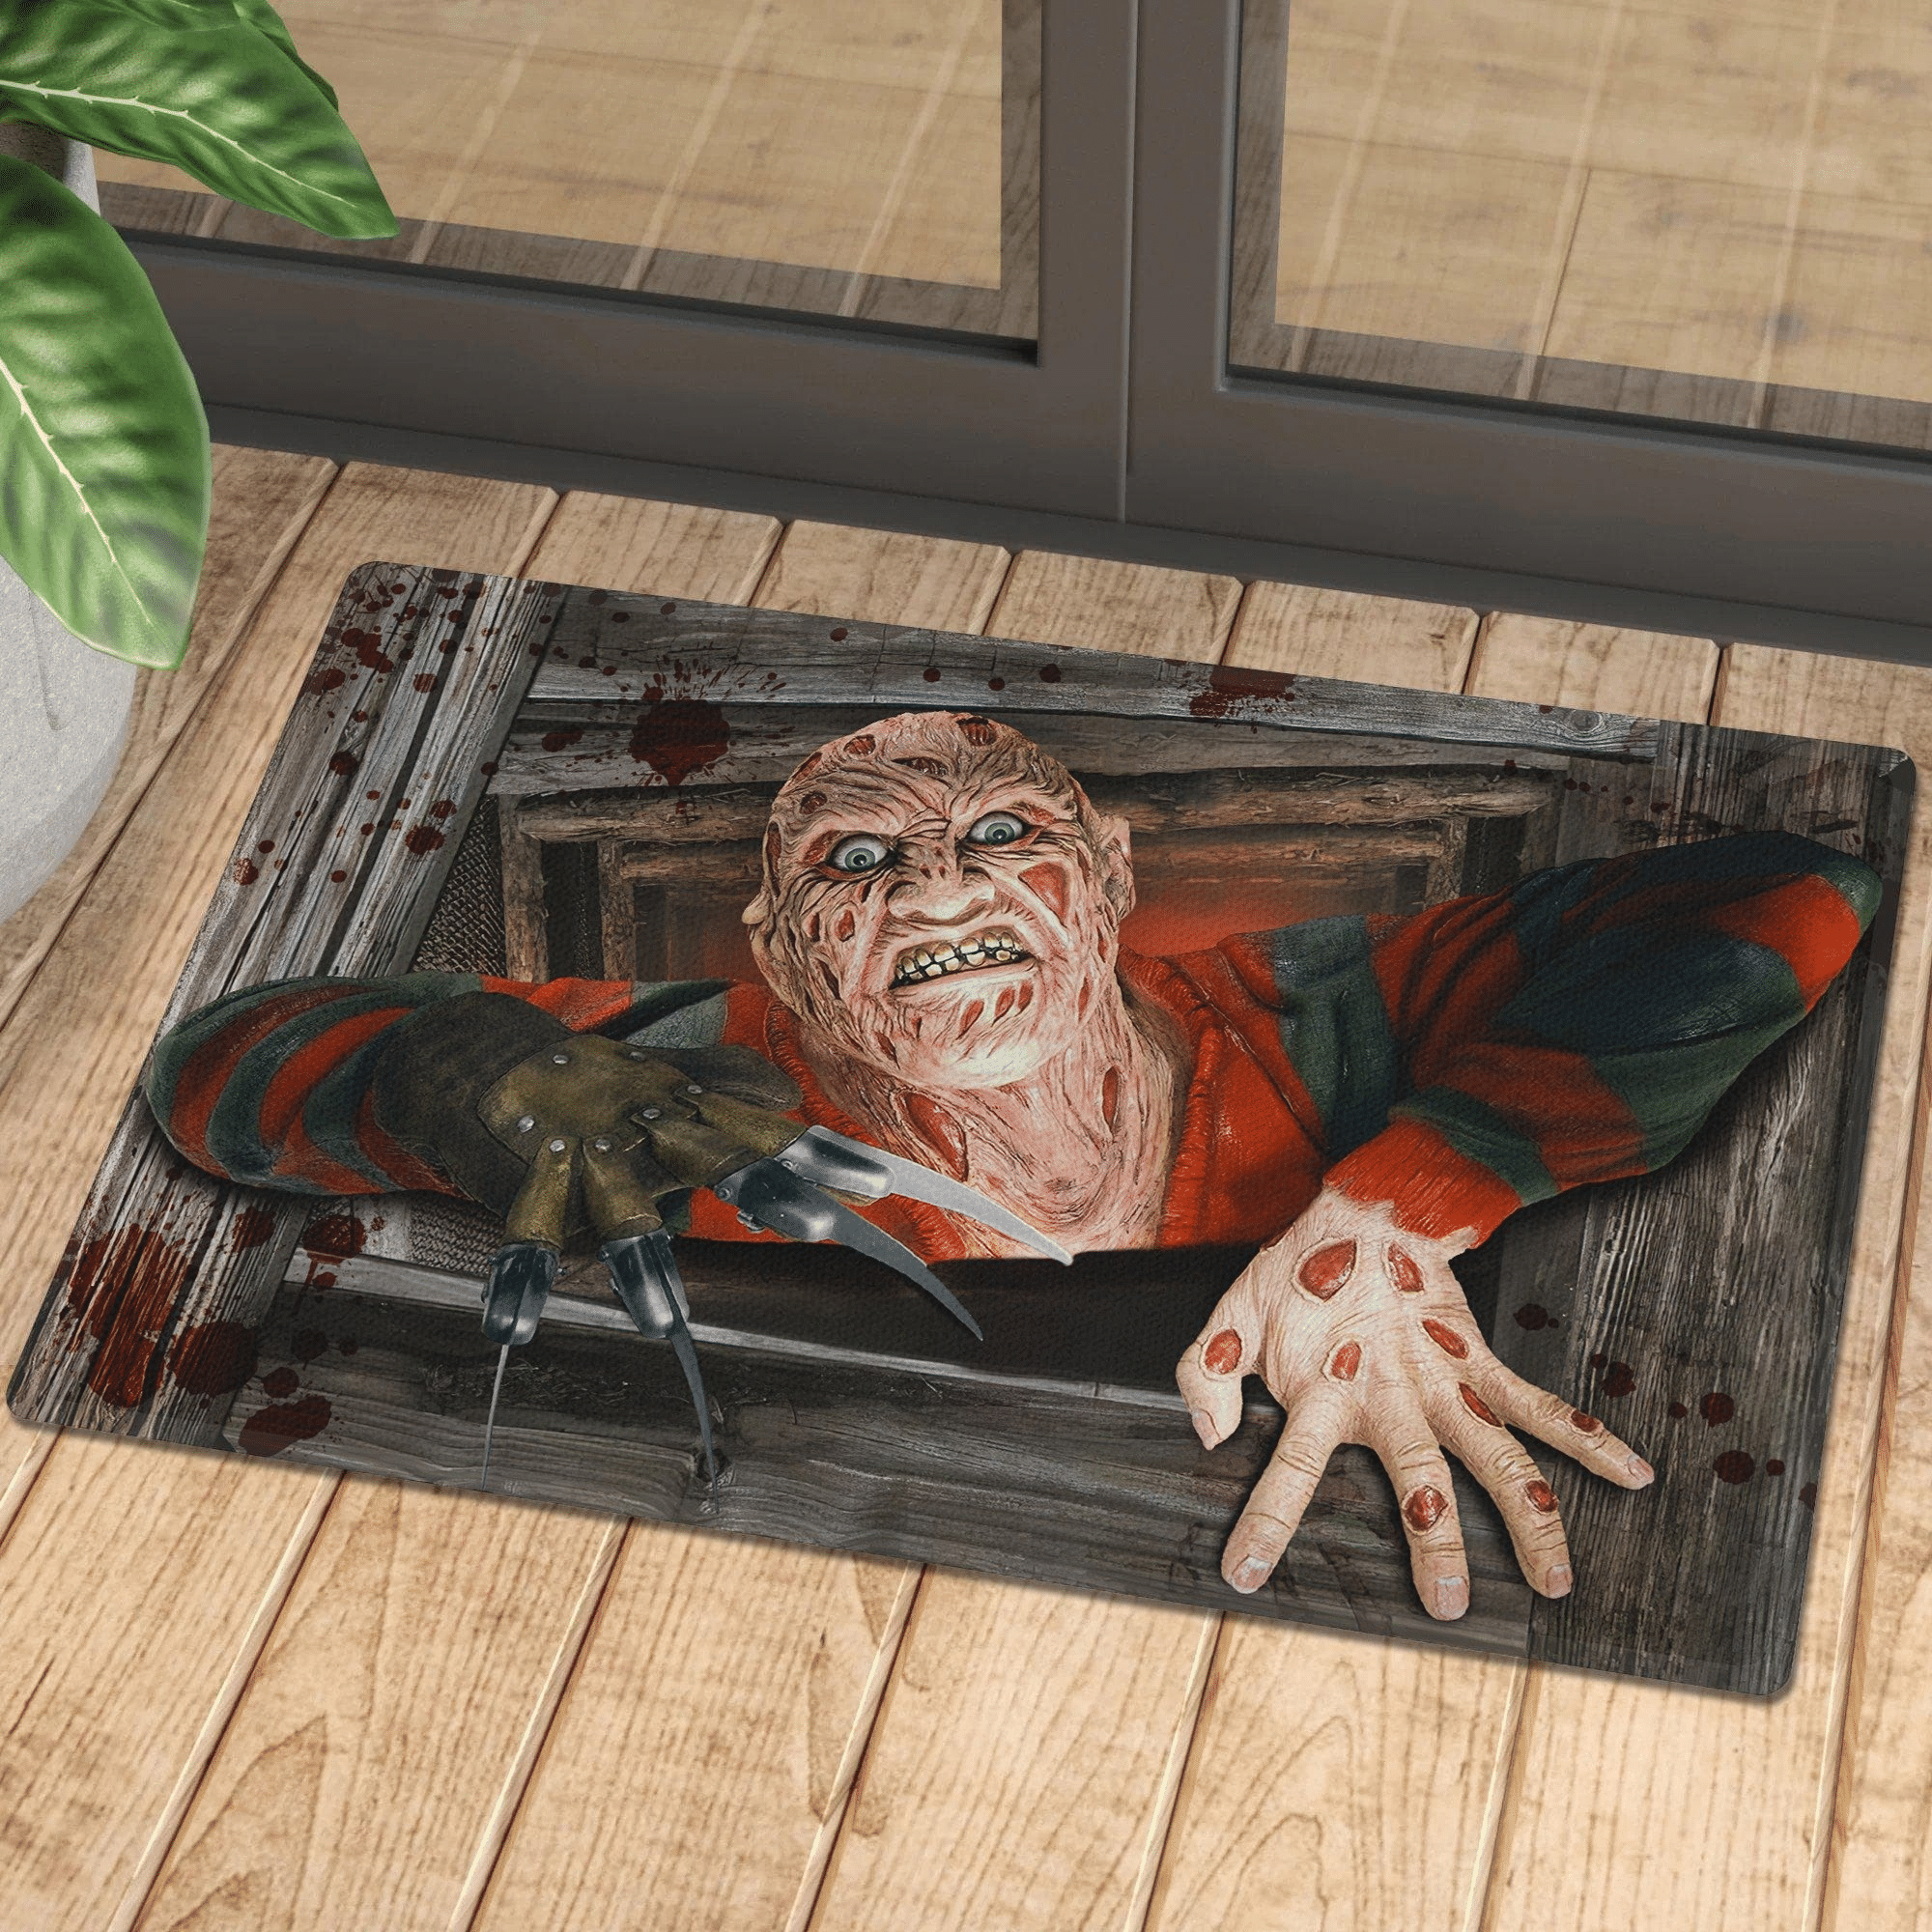 Horror characters we have been expecting you doormat – LIMITED EDITION